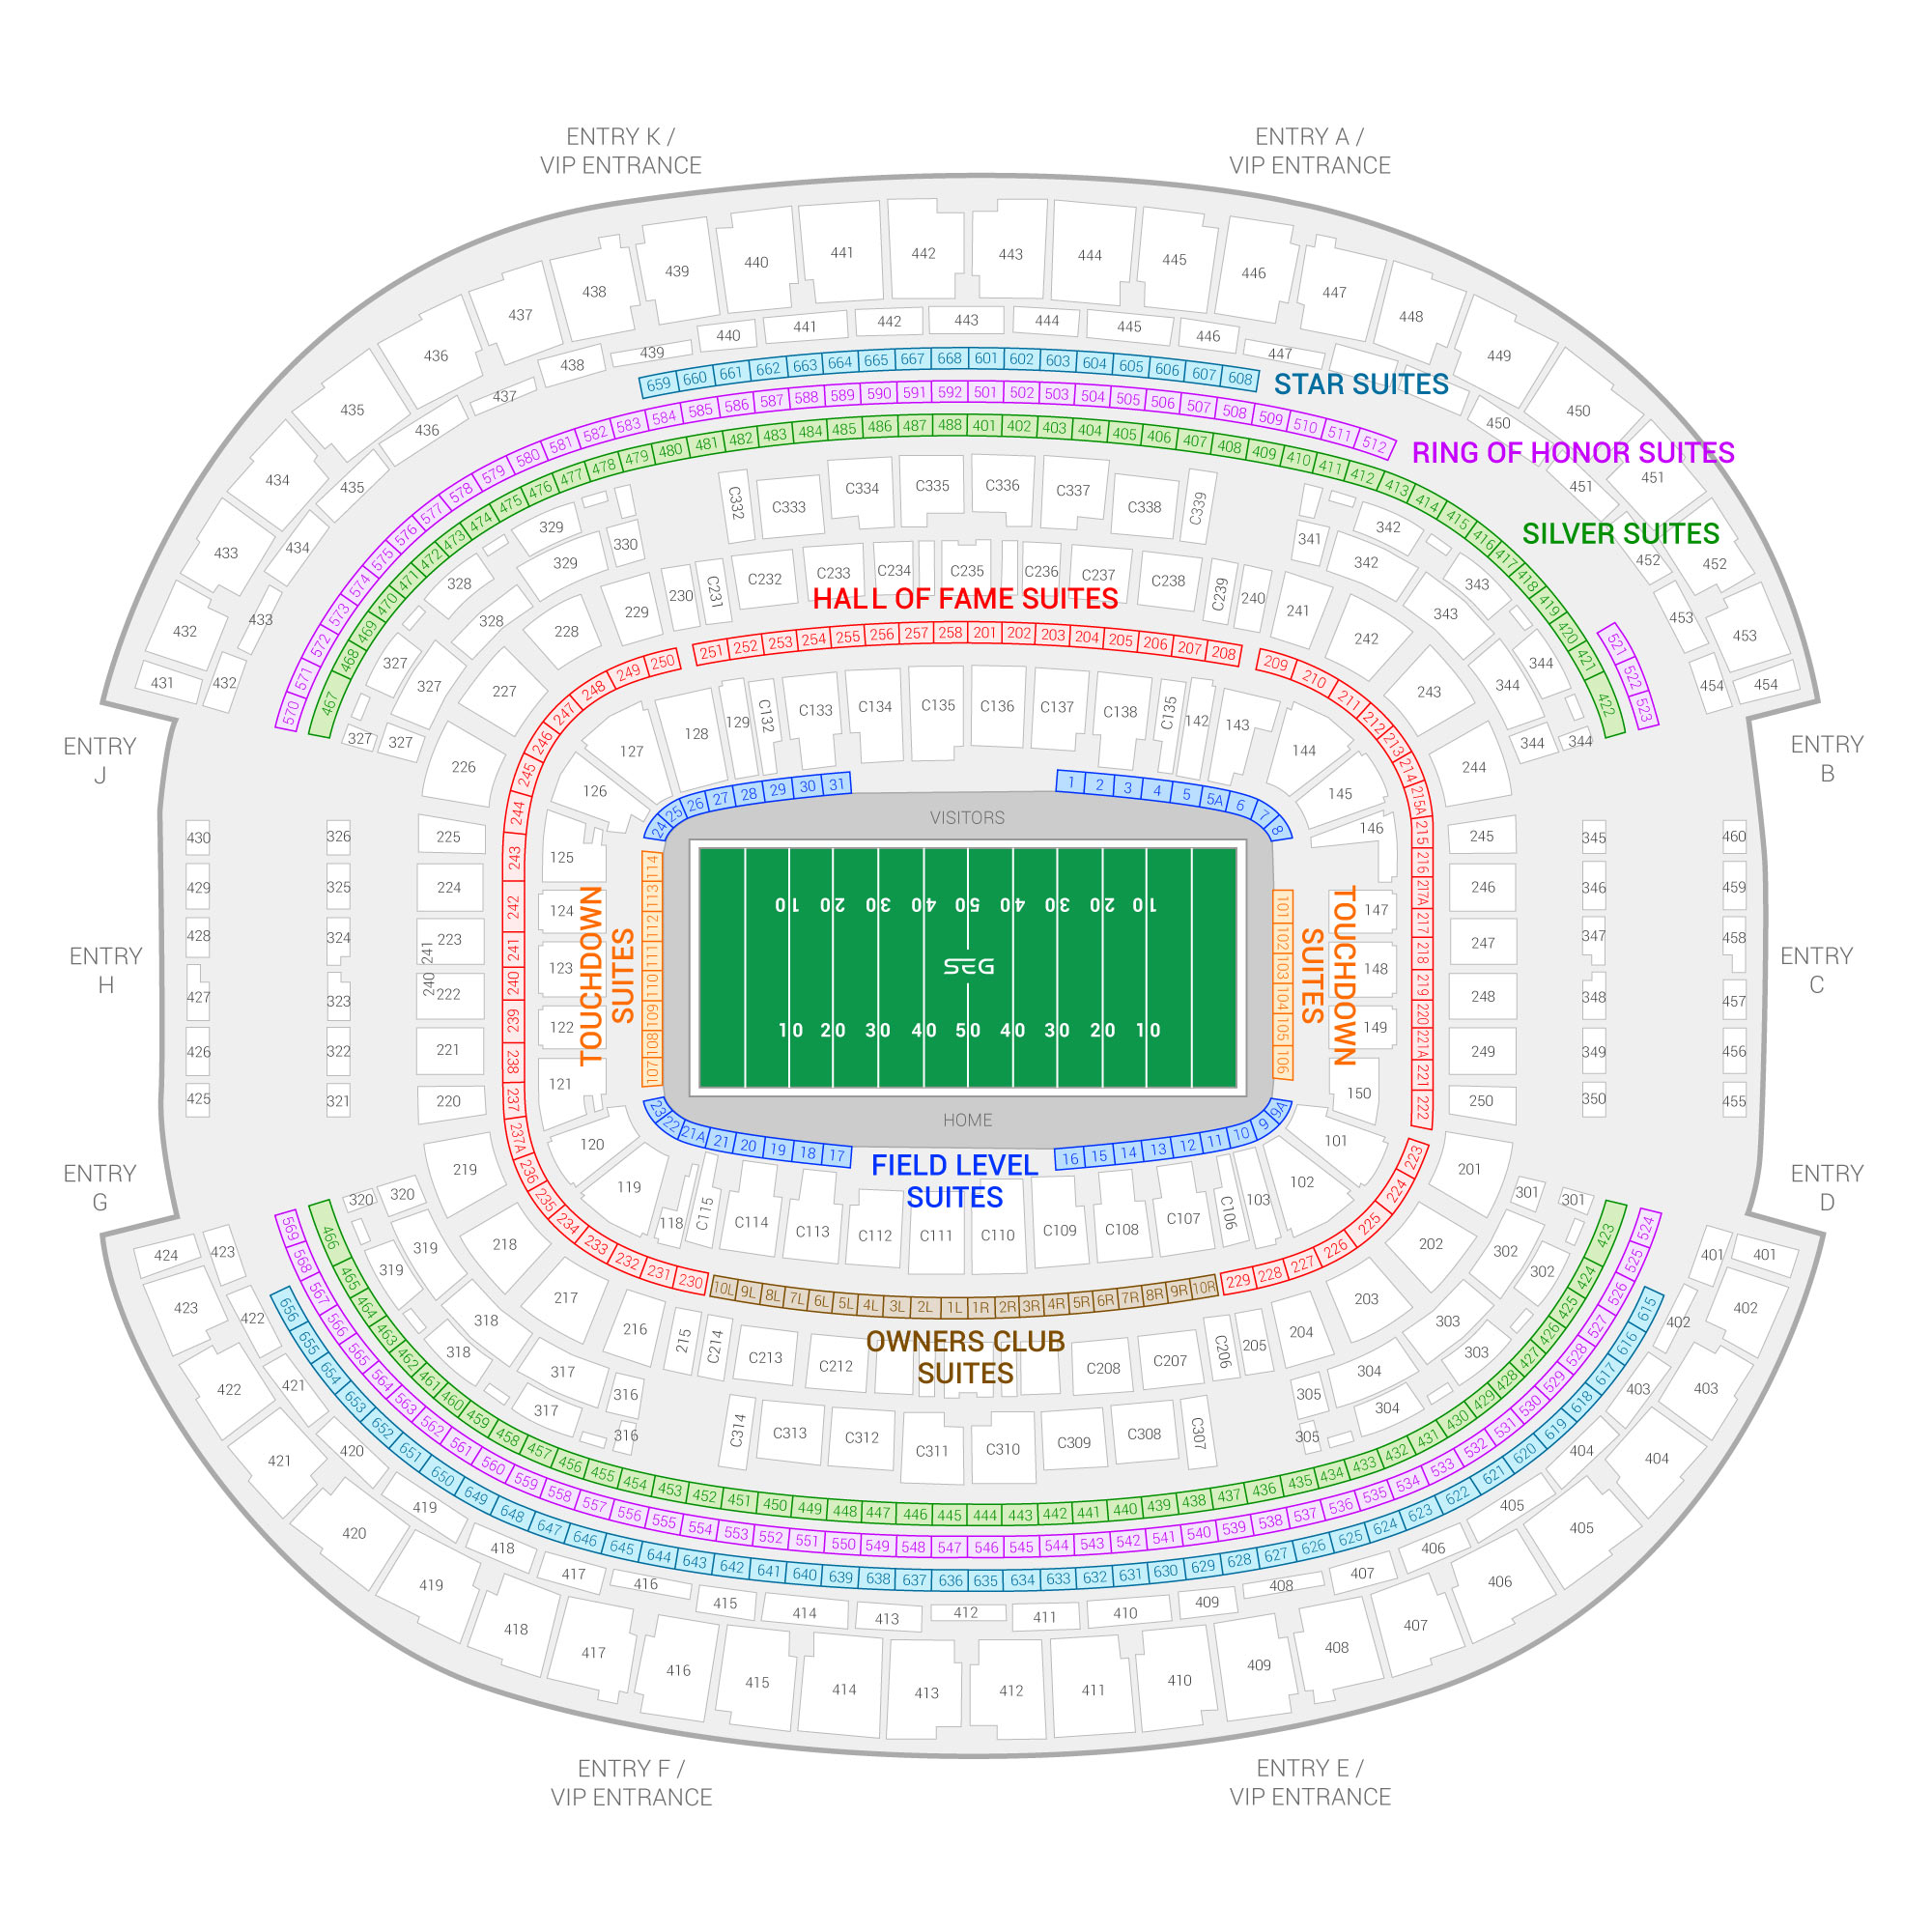 AT&T Stadium / Big 12 Football Championship Game Suite Map and Seating Chart